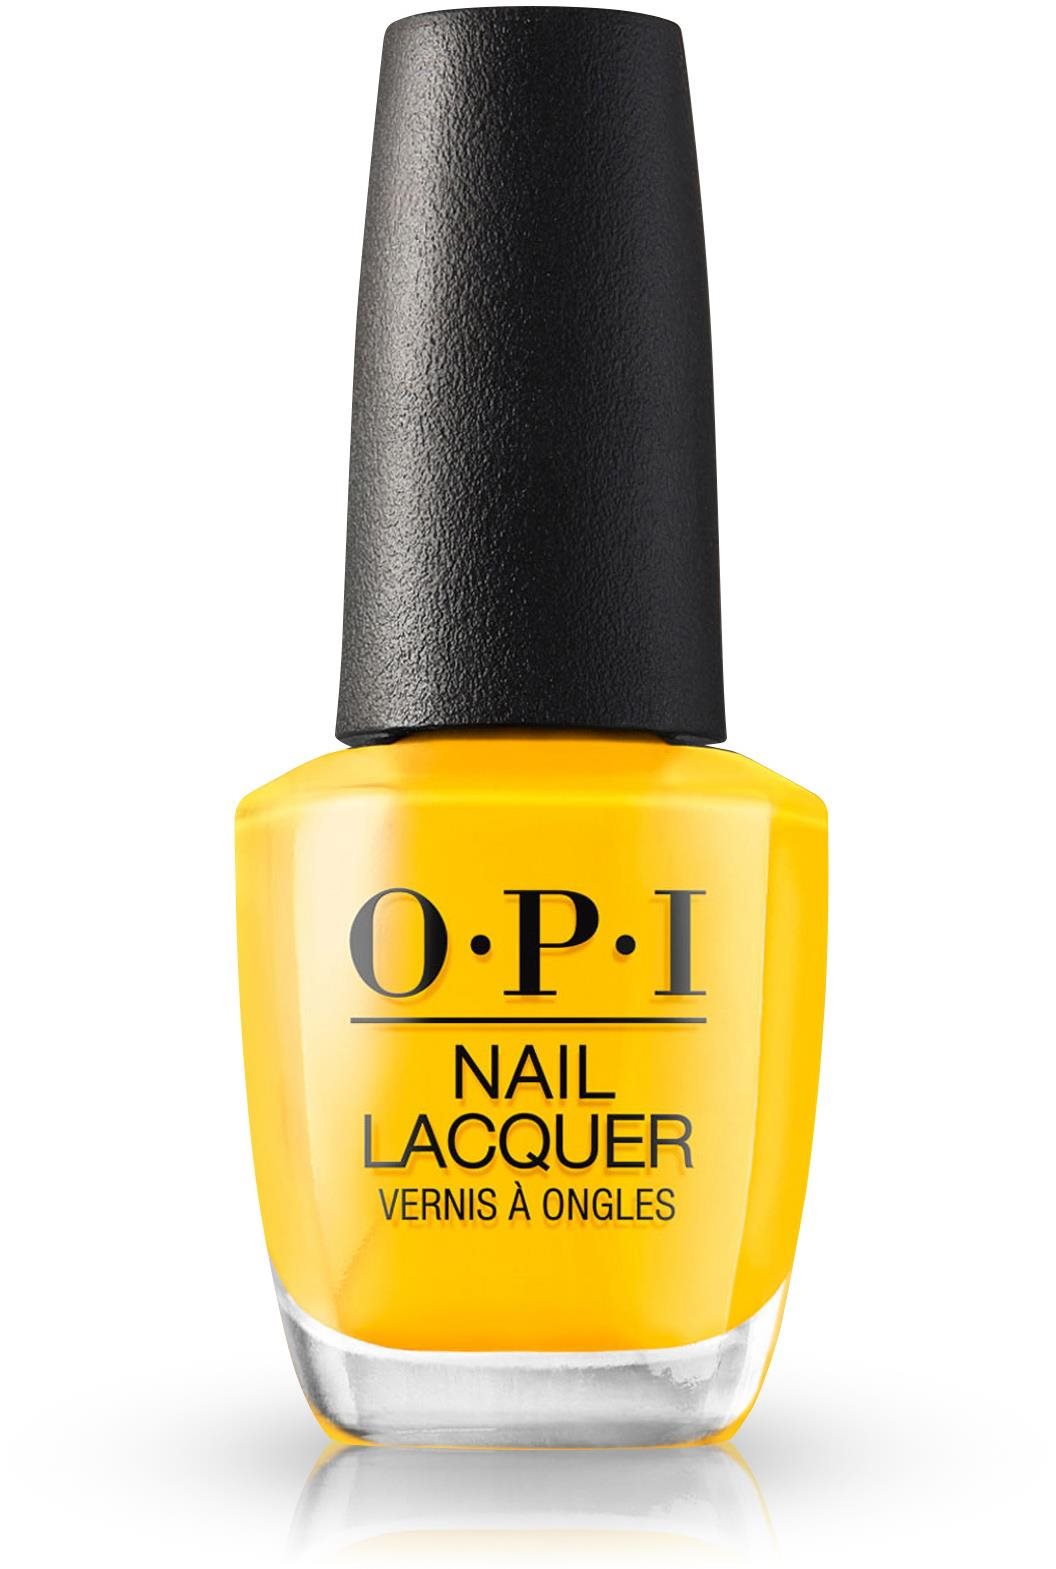 OPI Nail Lacquer Sun, Sea and Sand in My Pants 15 ml